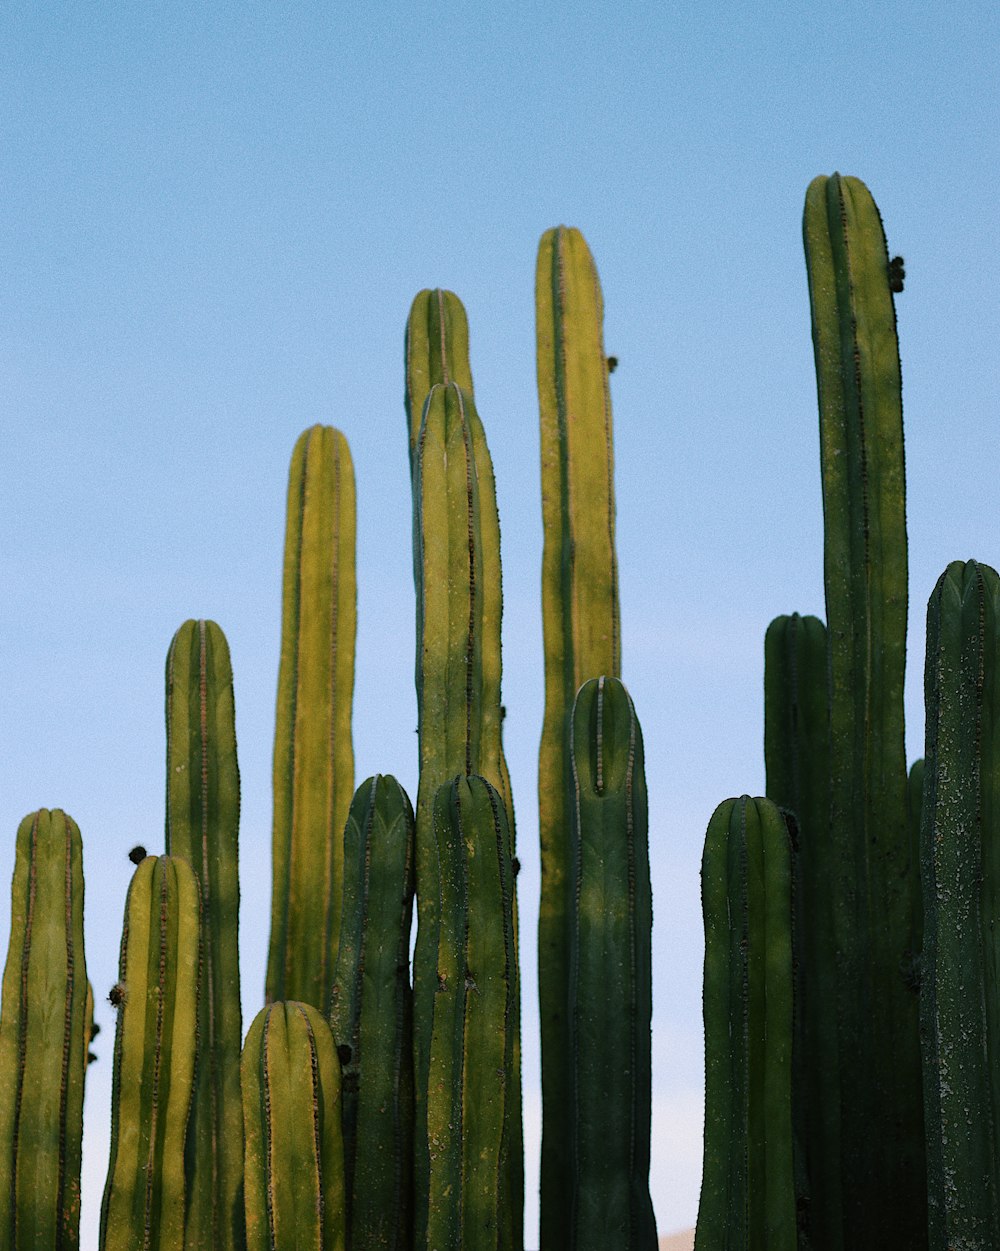 green cactus under blue sky at daytime